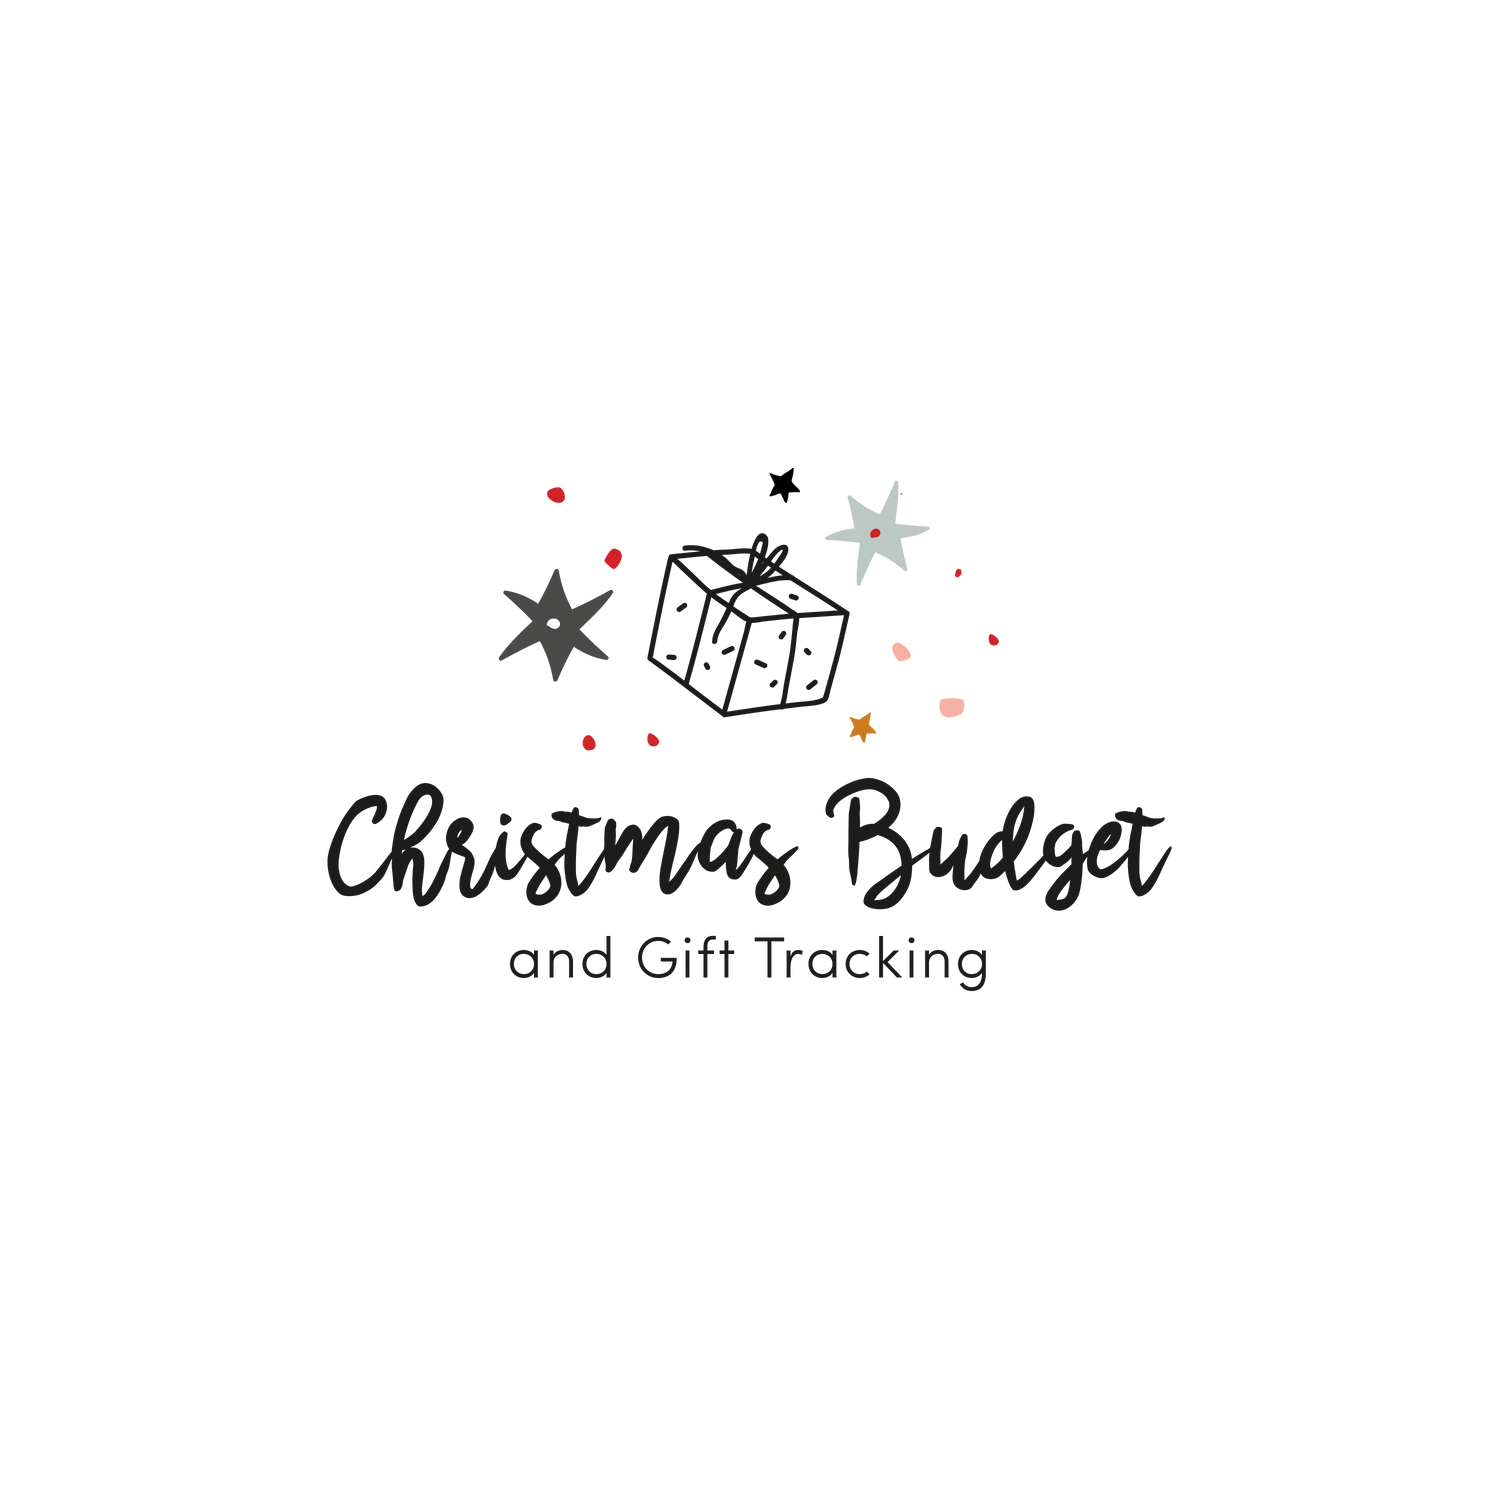 English version of the logo of the christmas budget and gift tracking document made by Les Belles Combines